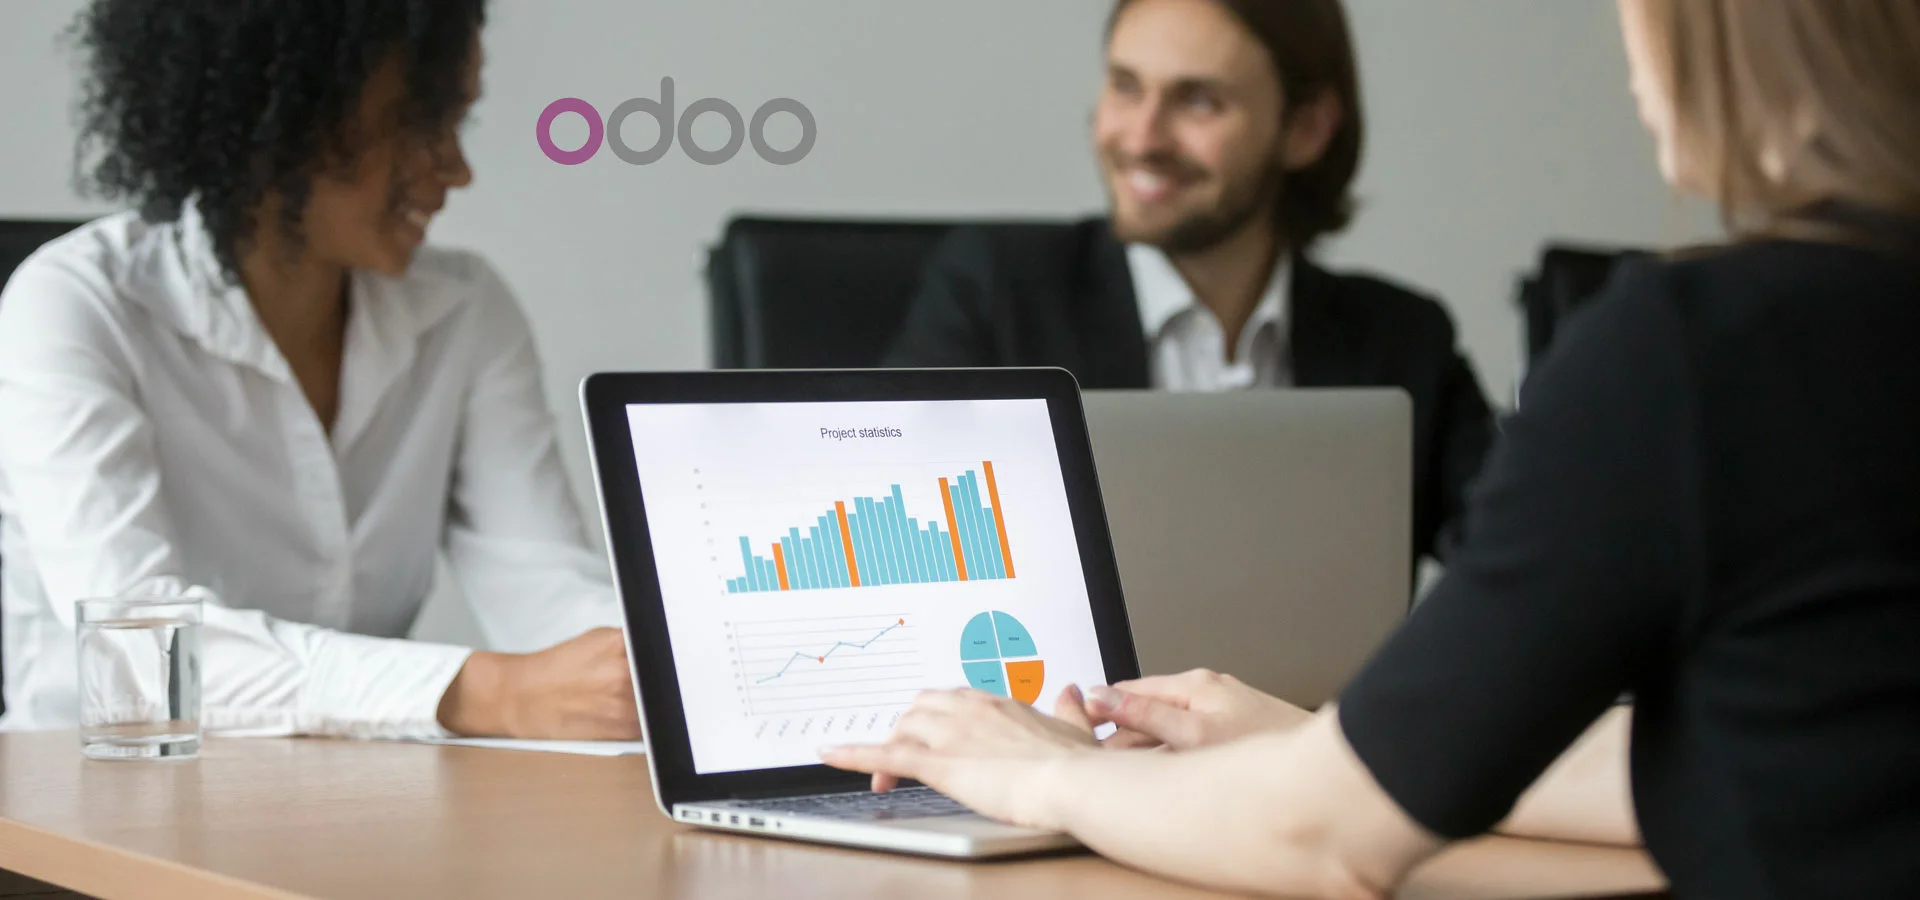 odoo-erp-support-and-services-related-blog-126